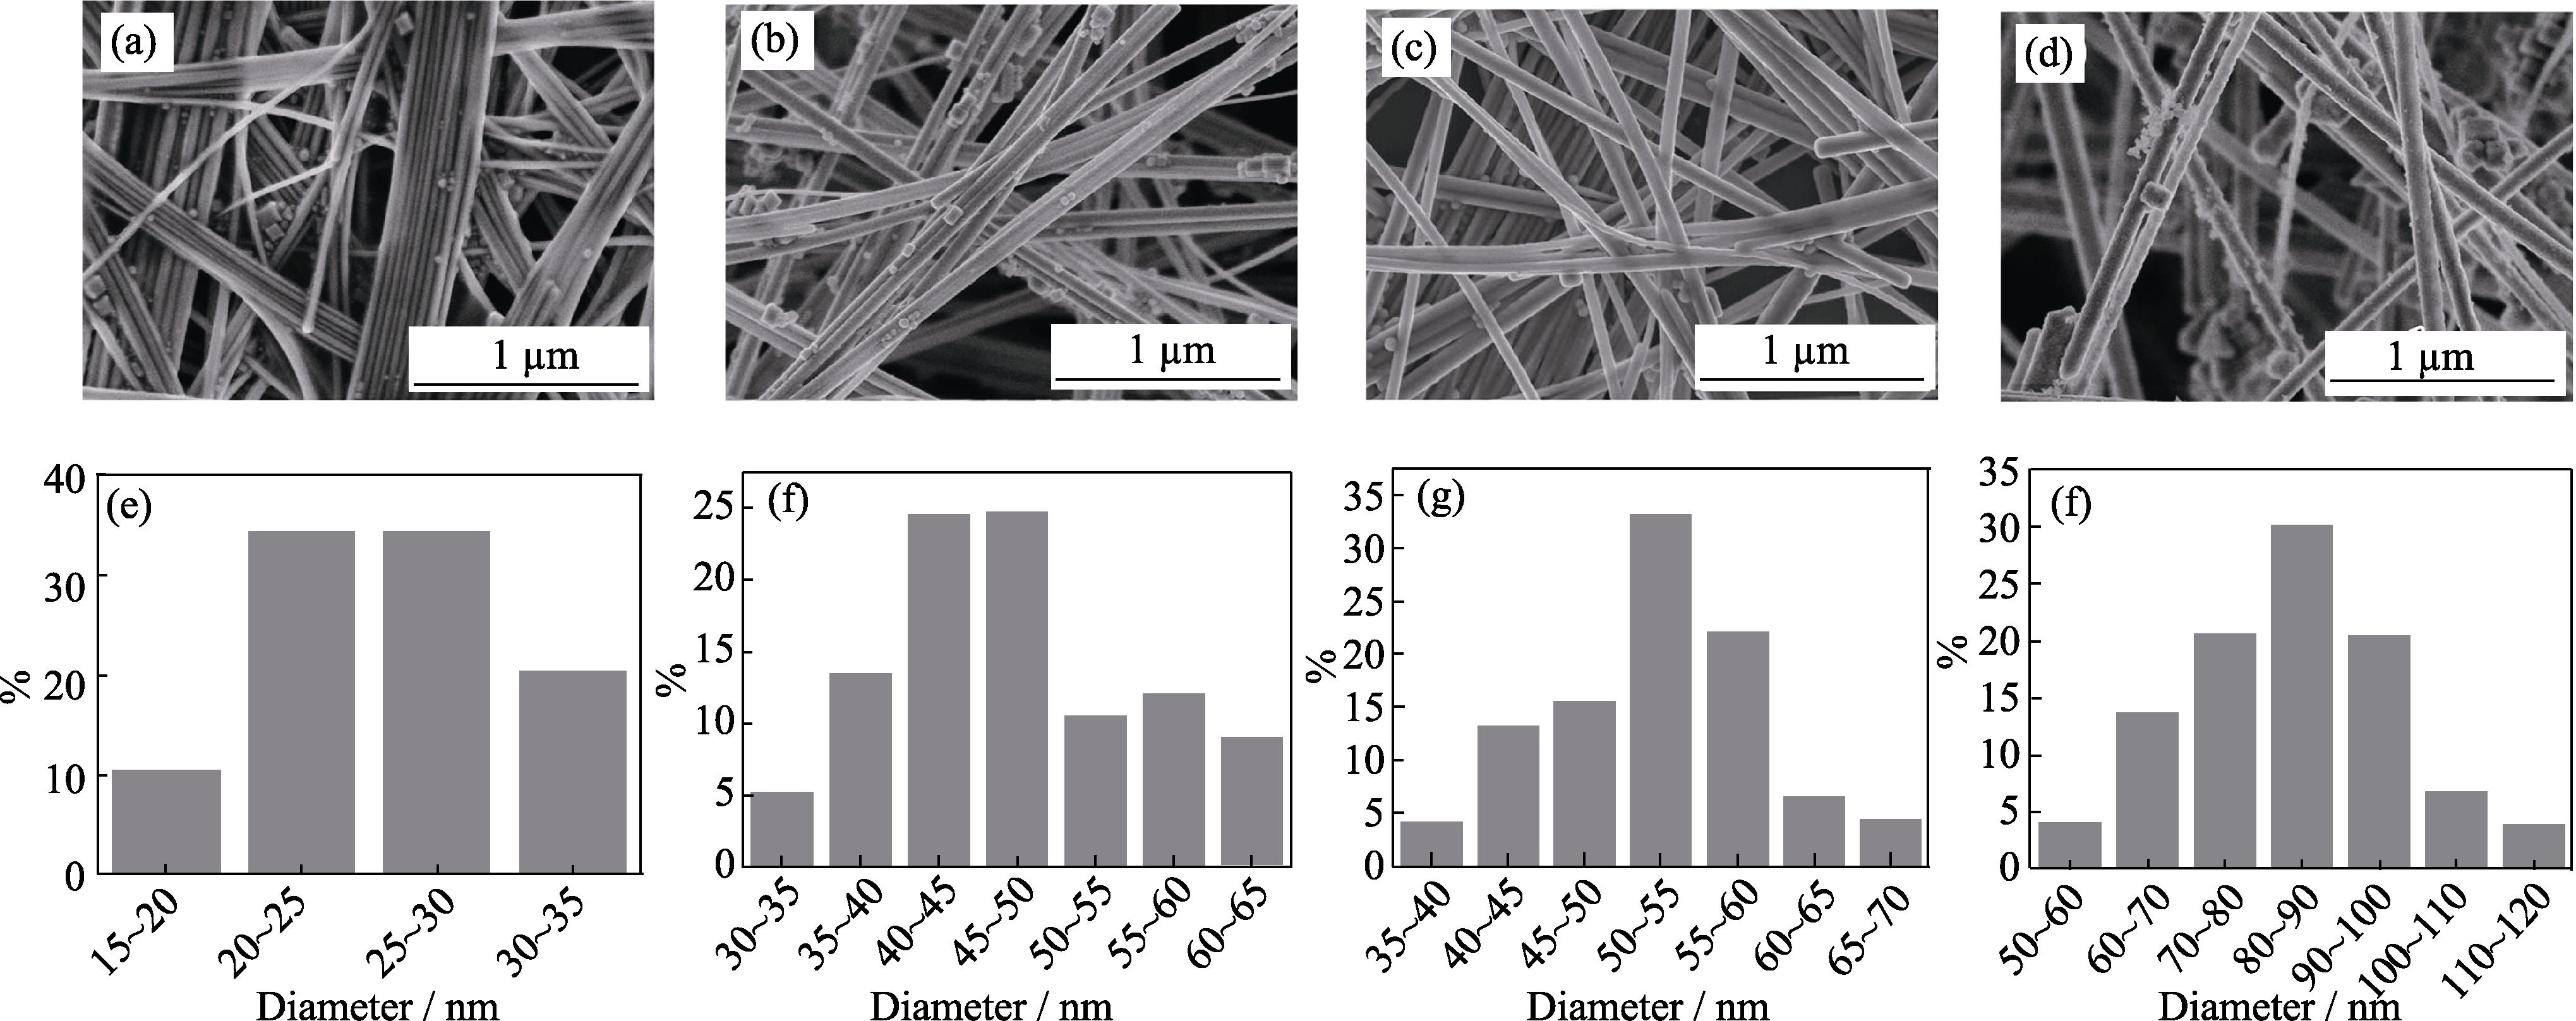 SEM images and diameter distribution of Cu nanowires synthesized by using different halide ions[16] (a, e) 2.6 mmol Cl-; (b,f) 2.0 mmol Cl-; (c,g) 1.6 mmol Cl-; (d,h) 1.6 mmol Br-